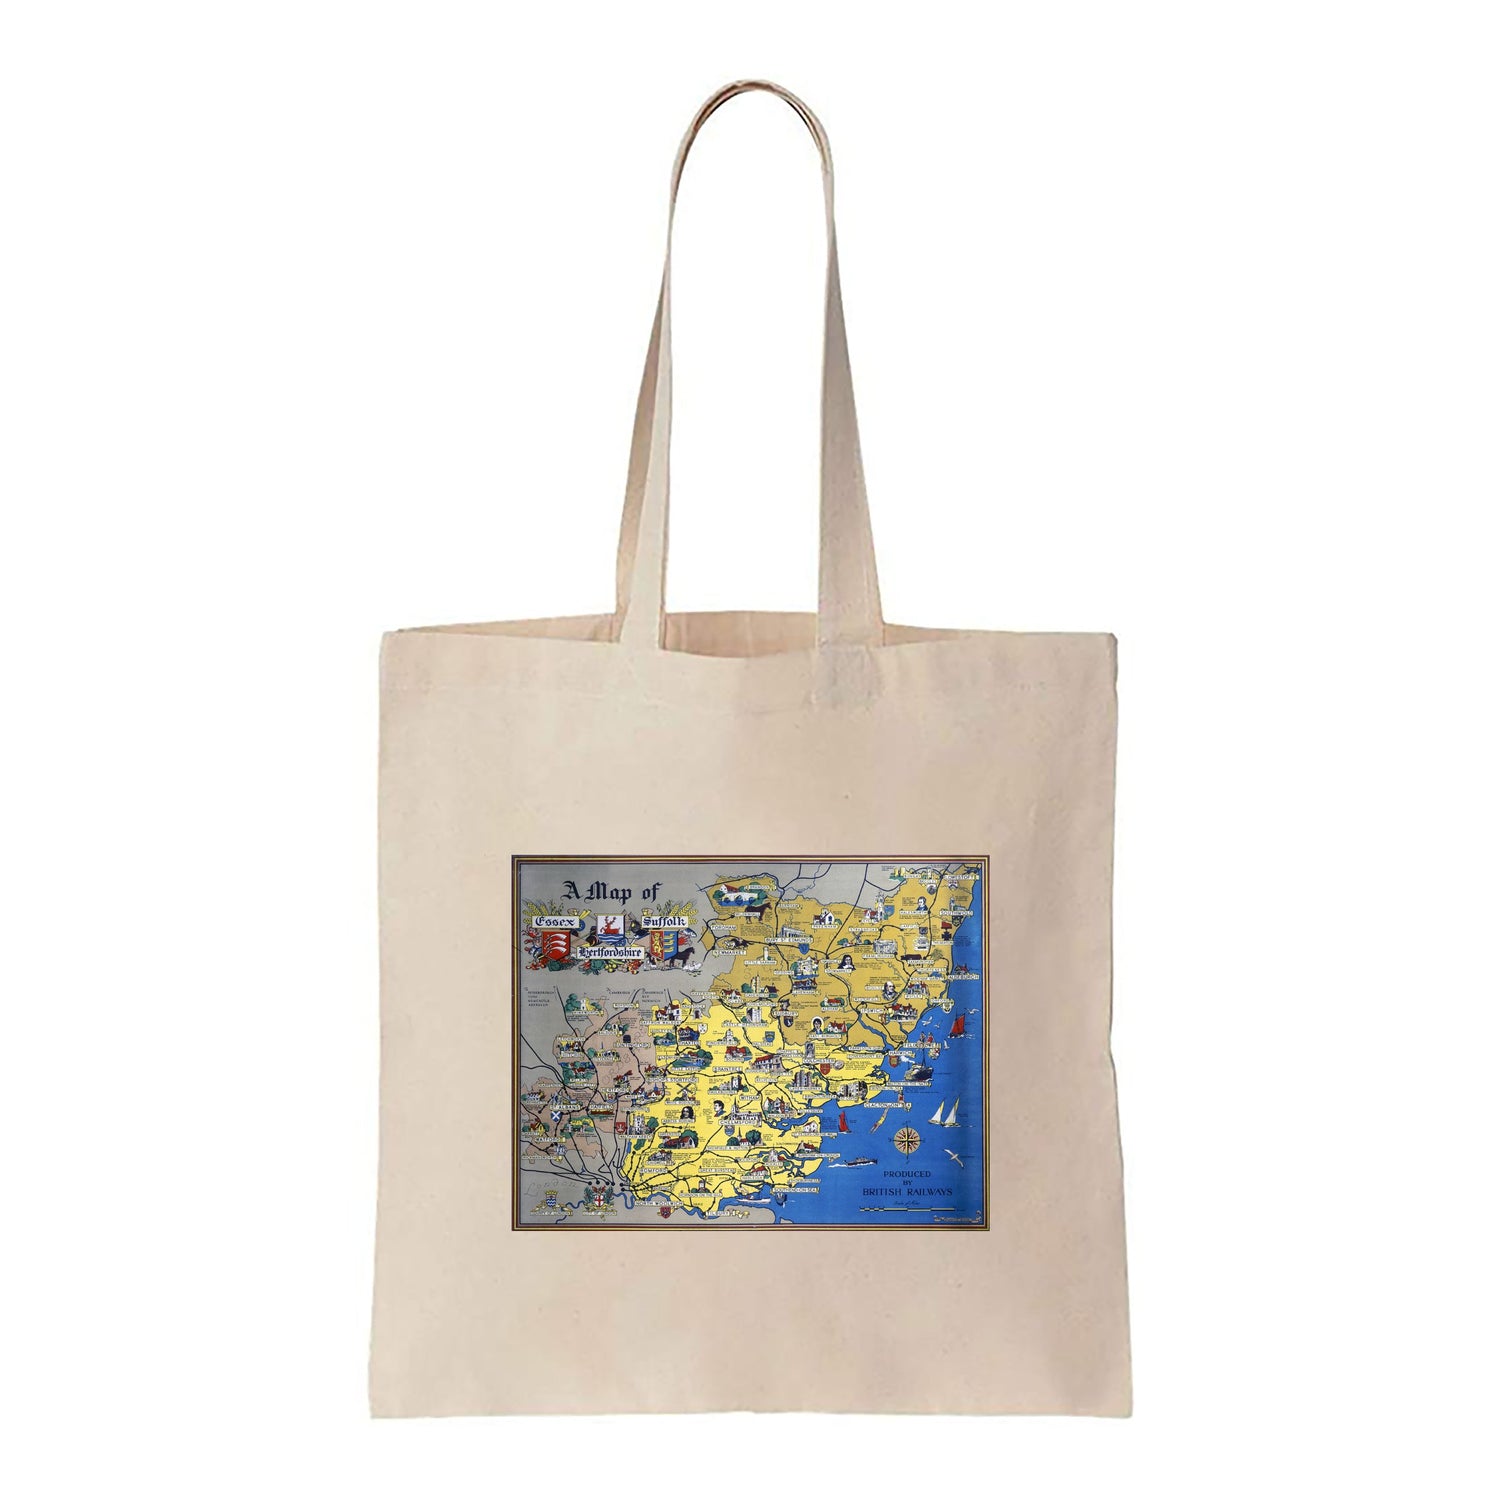 A Map of Essex, Suffolk, Hertfordshire - Canvas Tote Bag